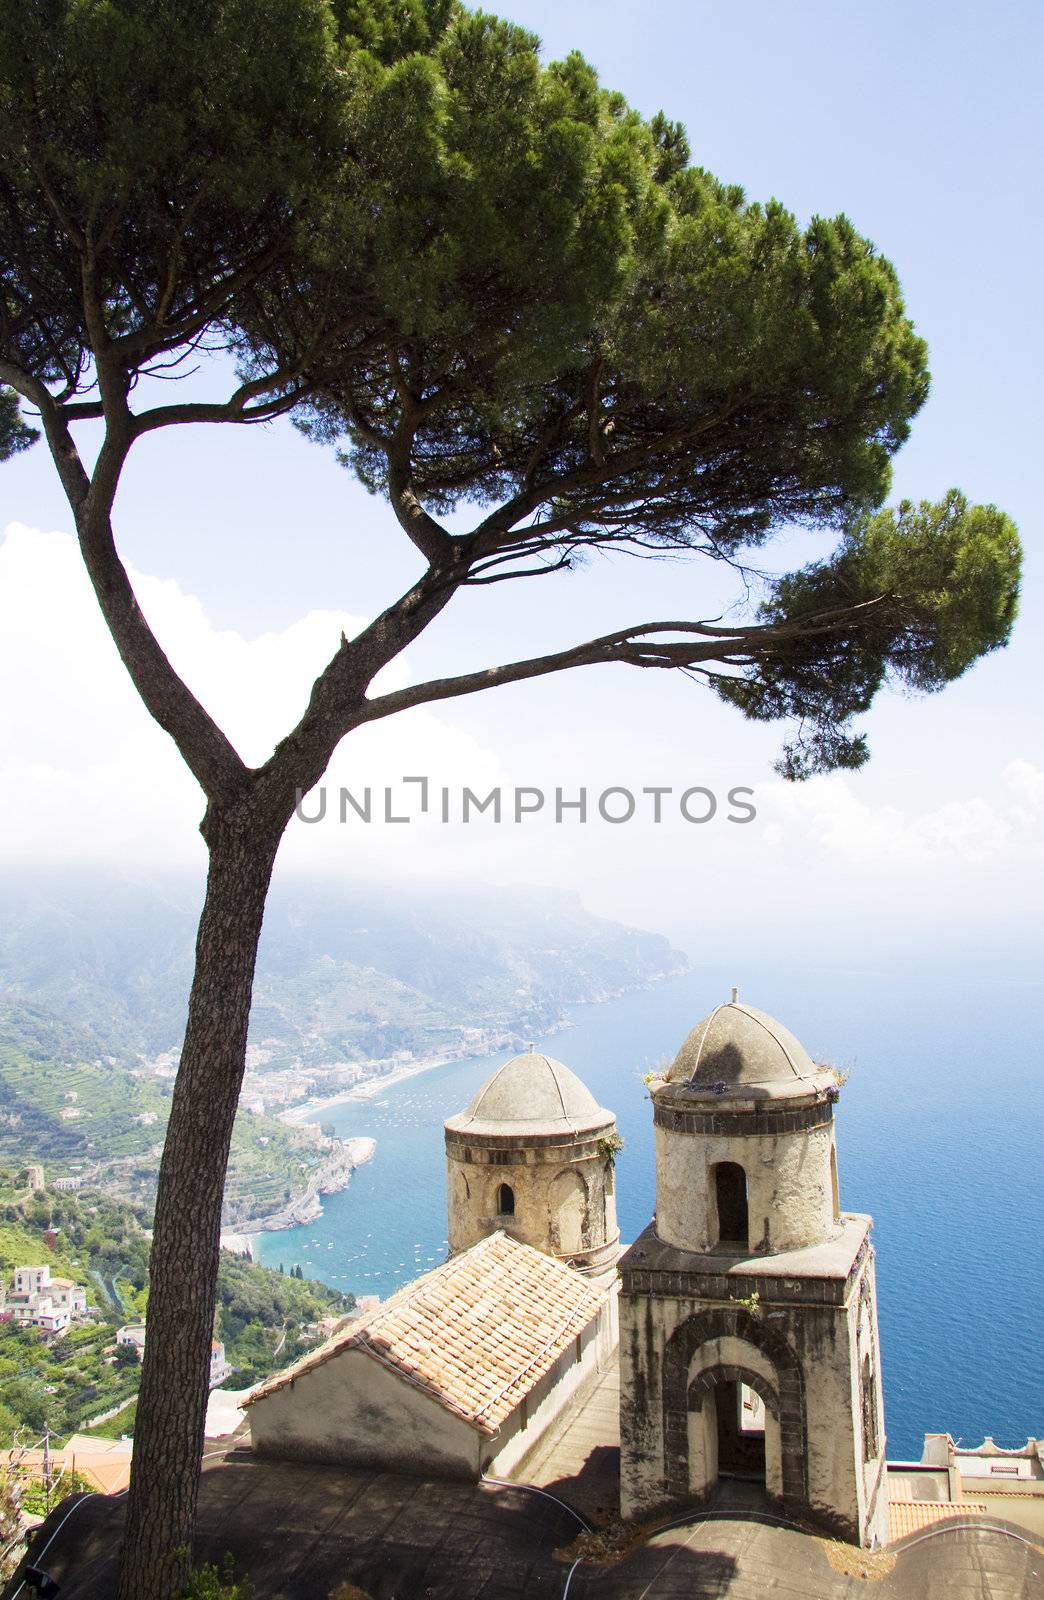 The Ravello garden offers a view of the two church towers, a tree and the Amalfi coast